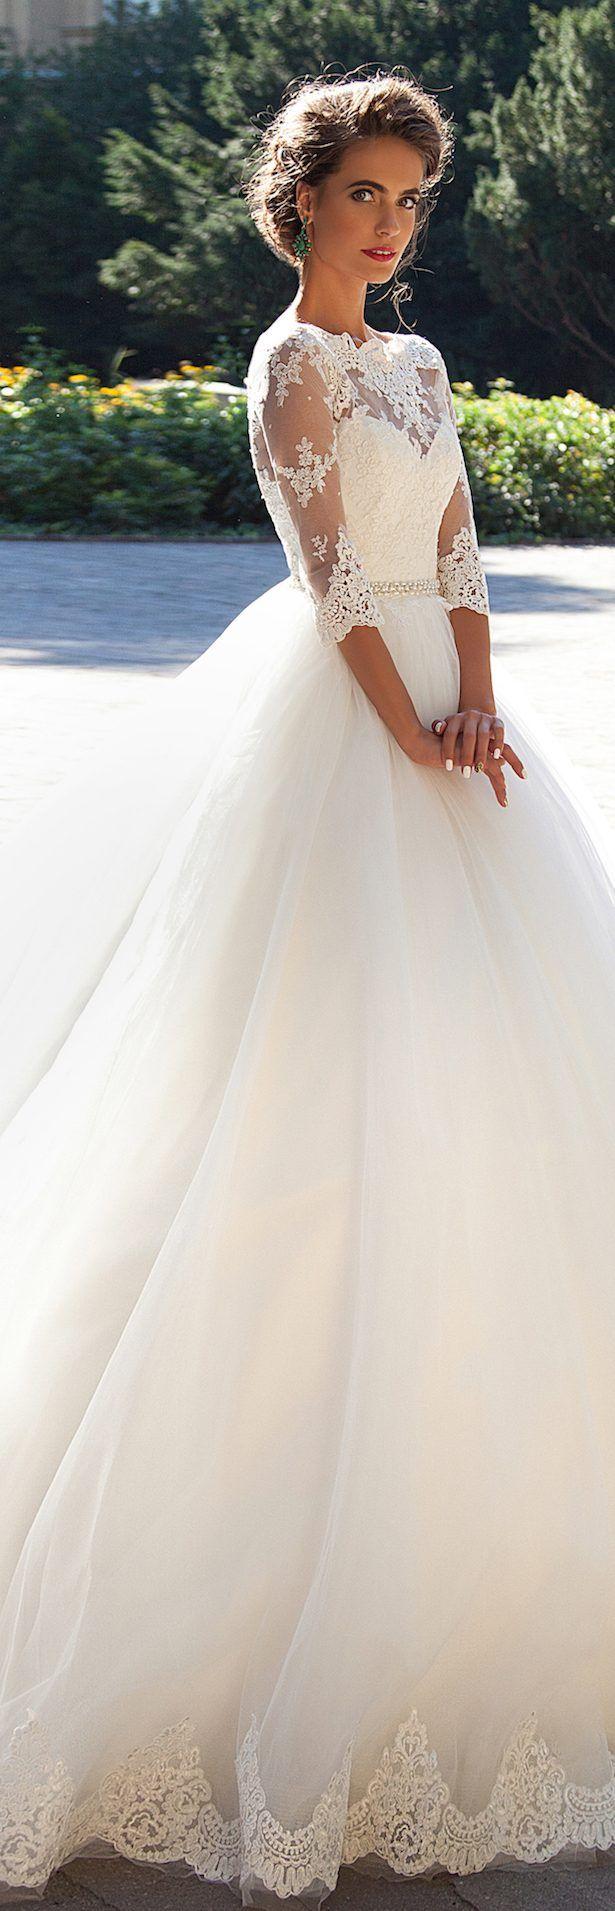 Wedding - 20 Ballgown Wedding Dresses That Will Leave You Speachless